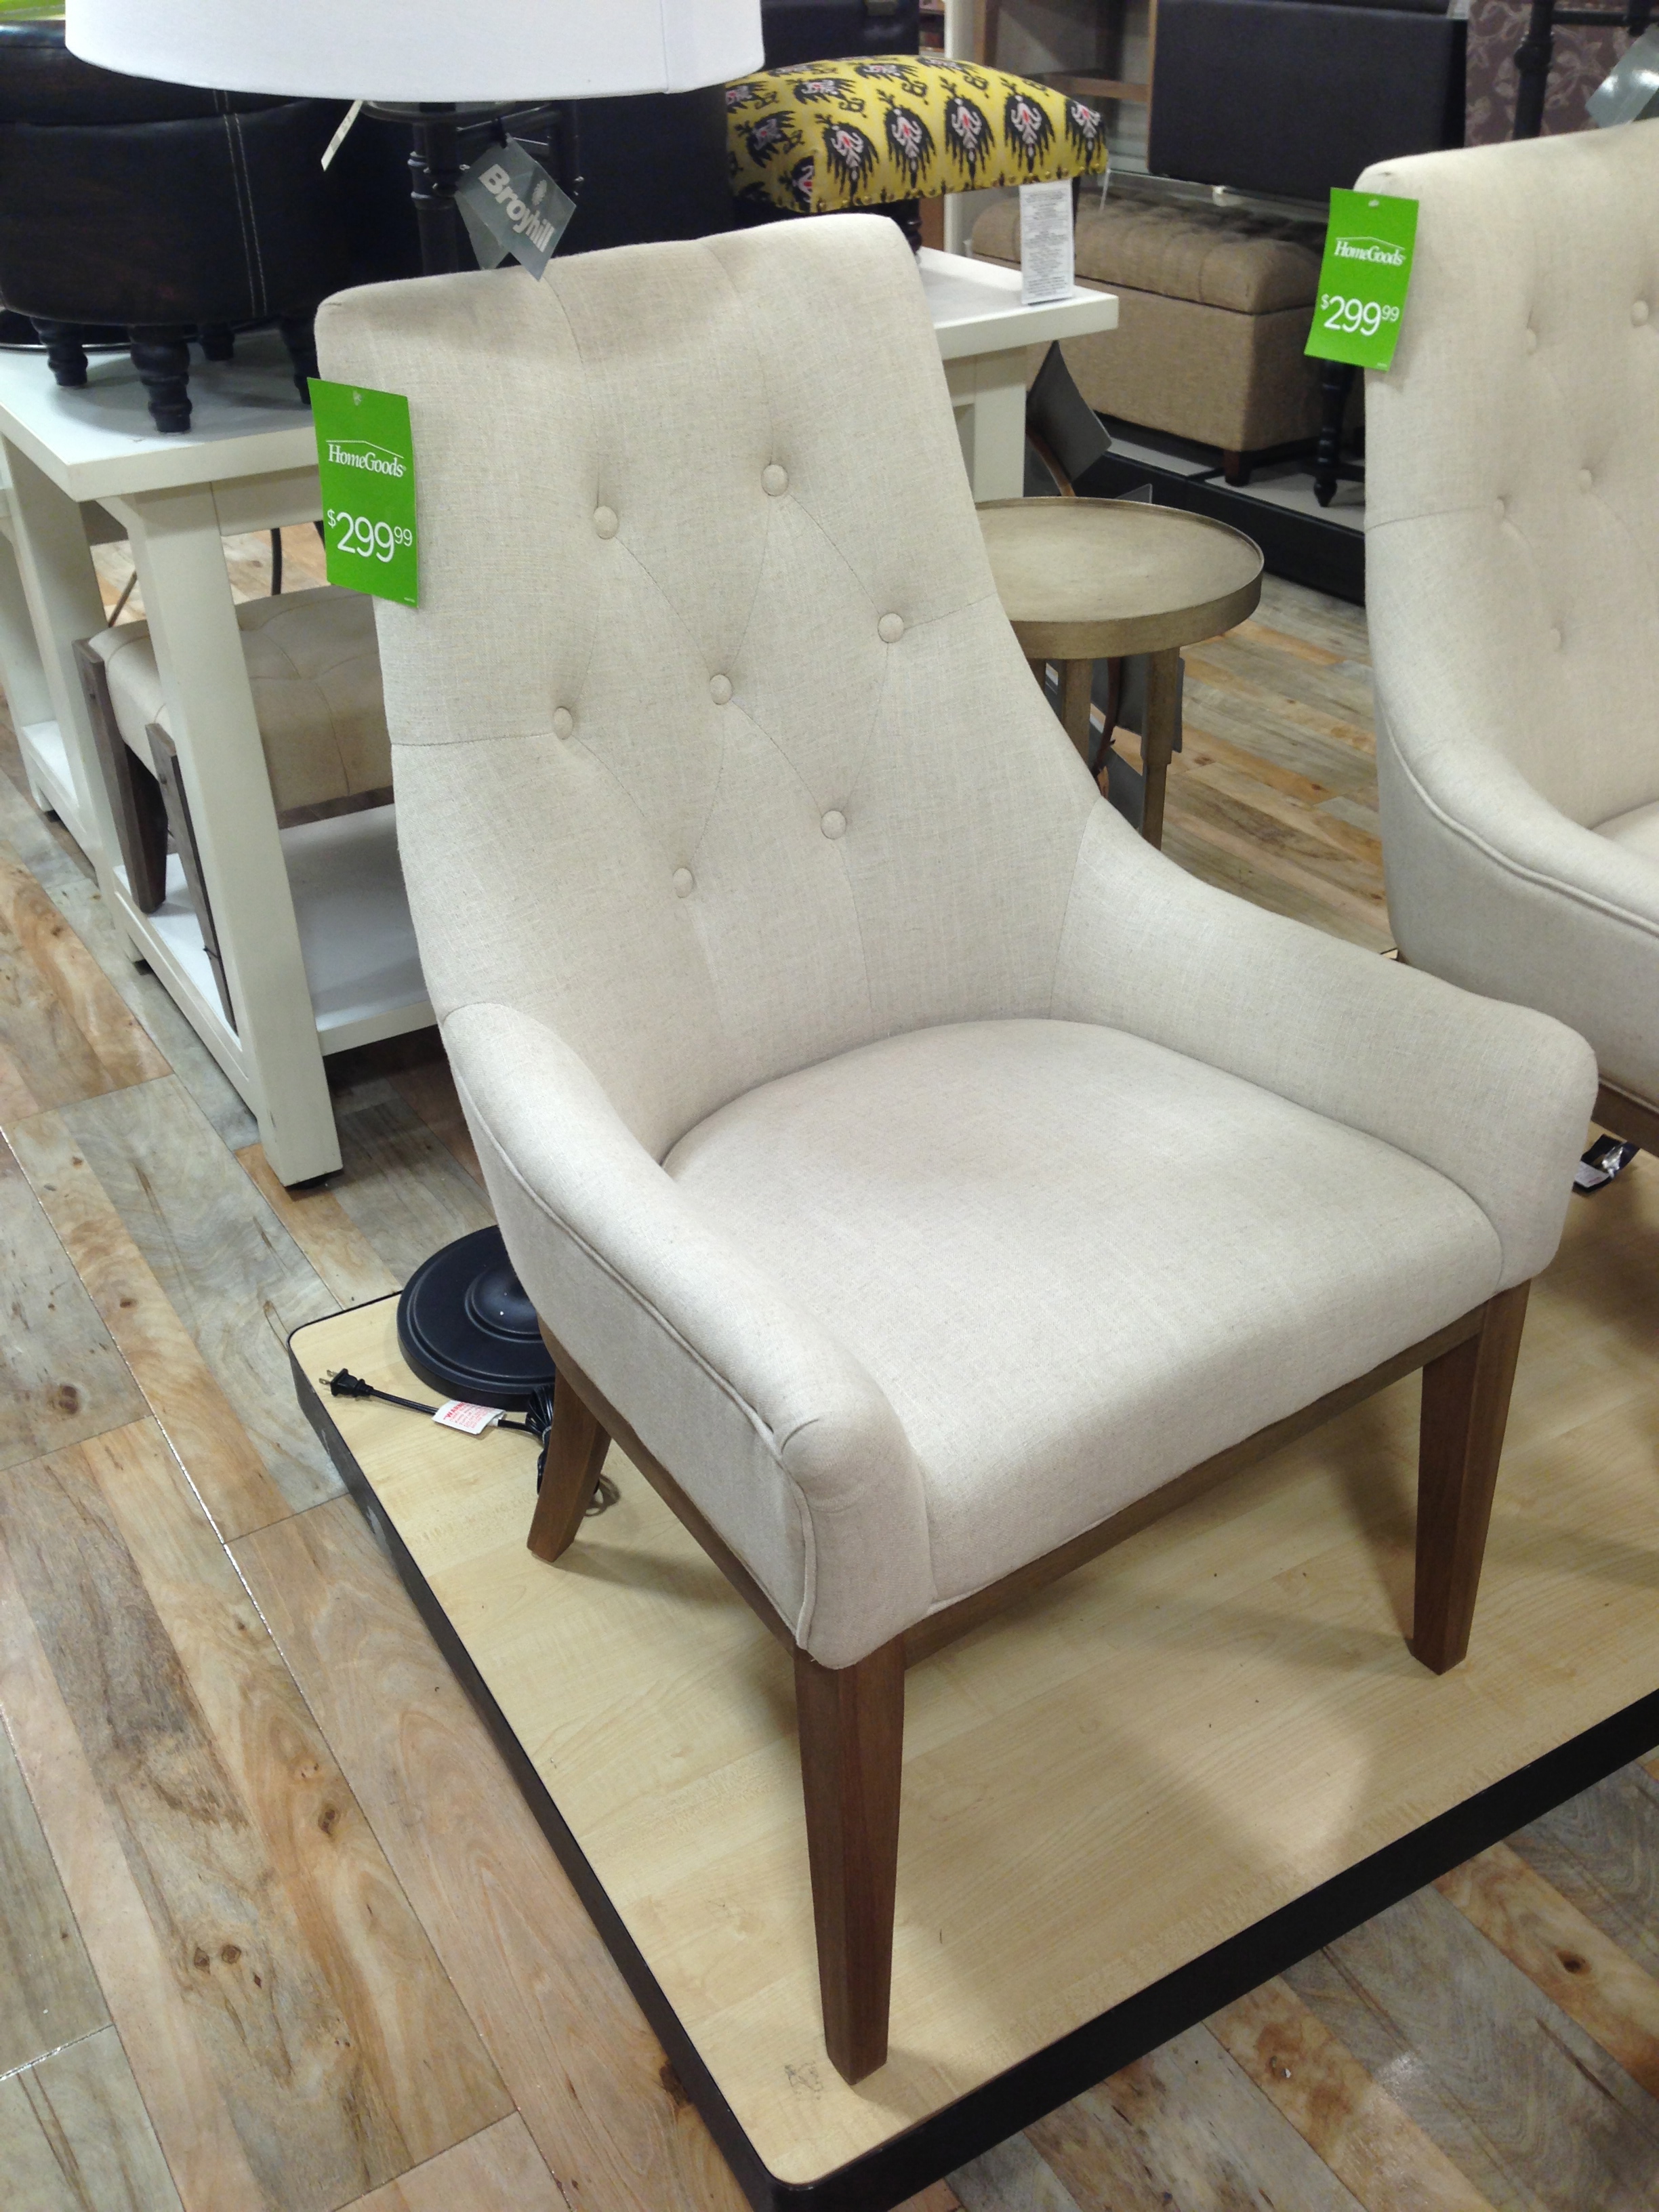 Picture 9 of 44 - Tufted Dining Chairs with Nailheads Fresh Accent ...